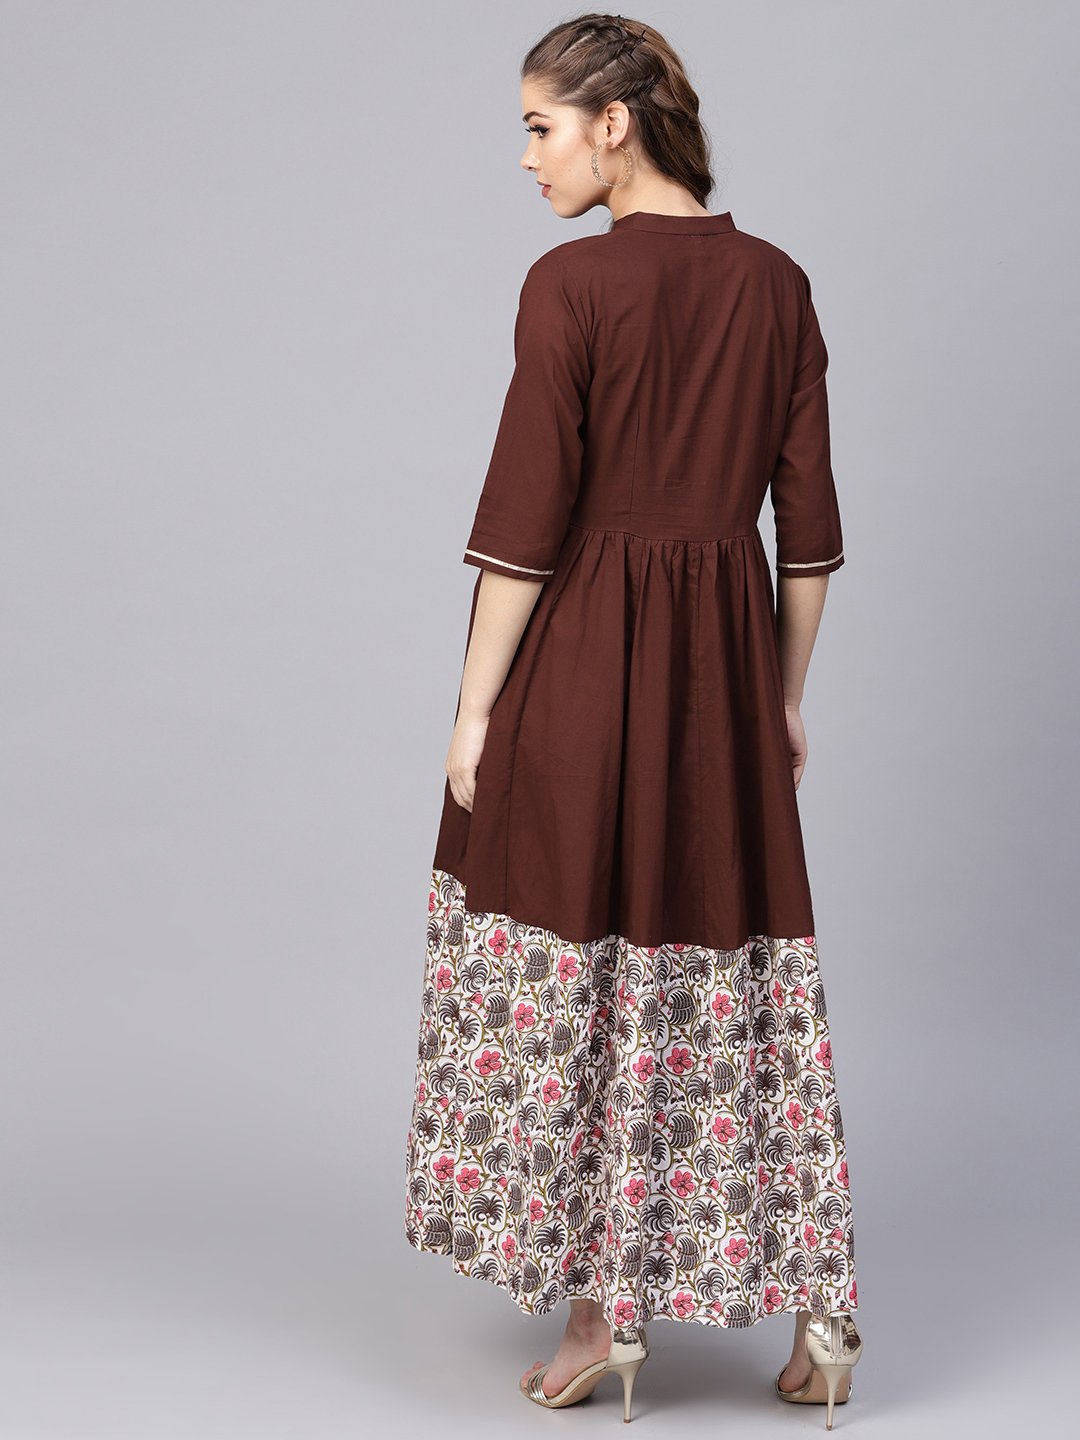 Women's Dark Brown Maxi Dress  With Printed Border & Front Placket With Madarin Collar - Nayo Clothing